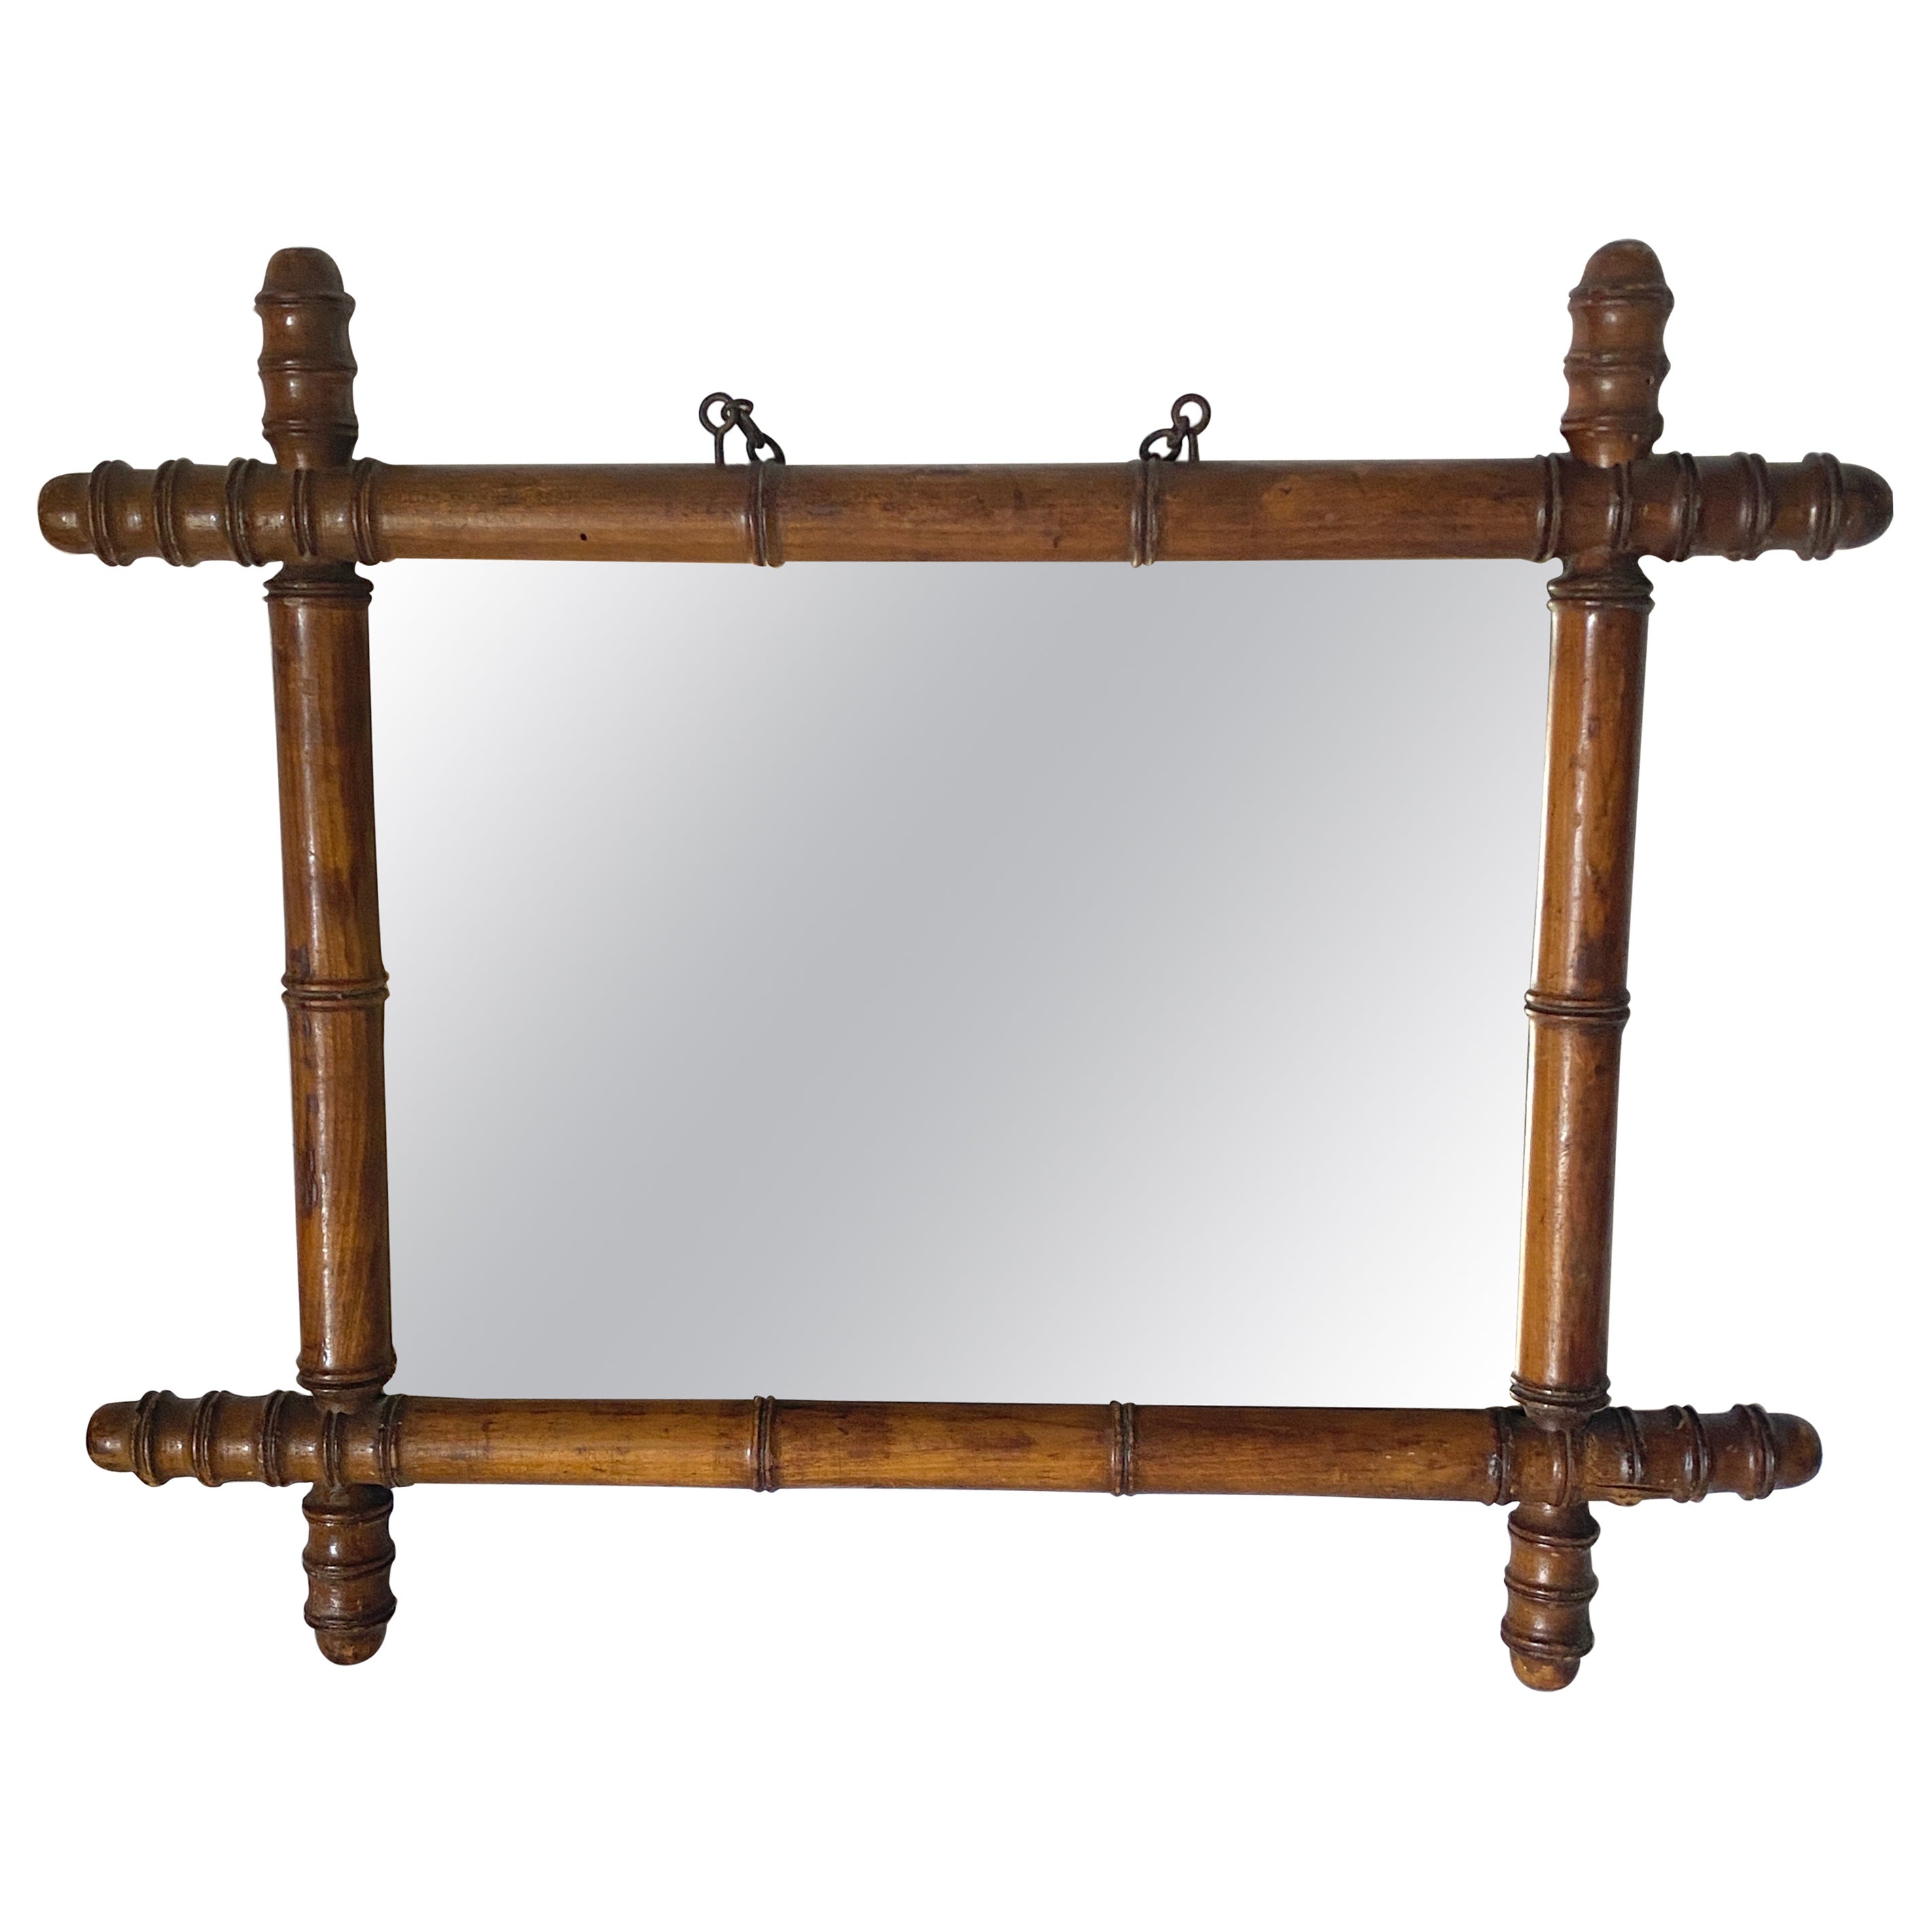 Faux Bamboo Mirror, Medium Size, Brown Color, France, circa 1940 For Sale